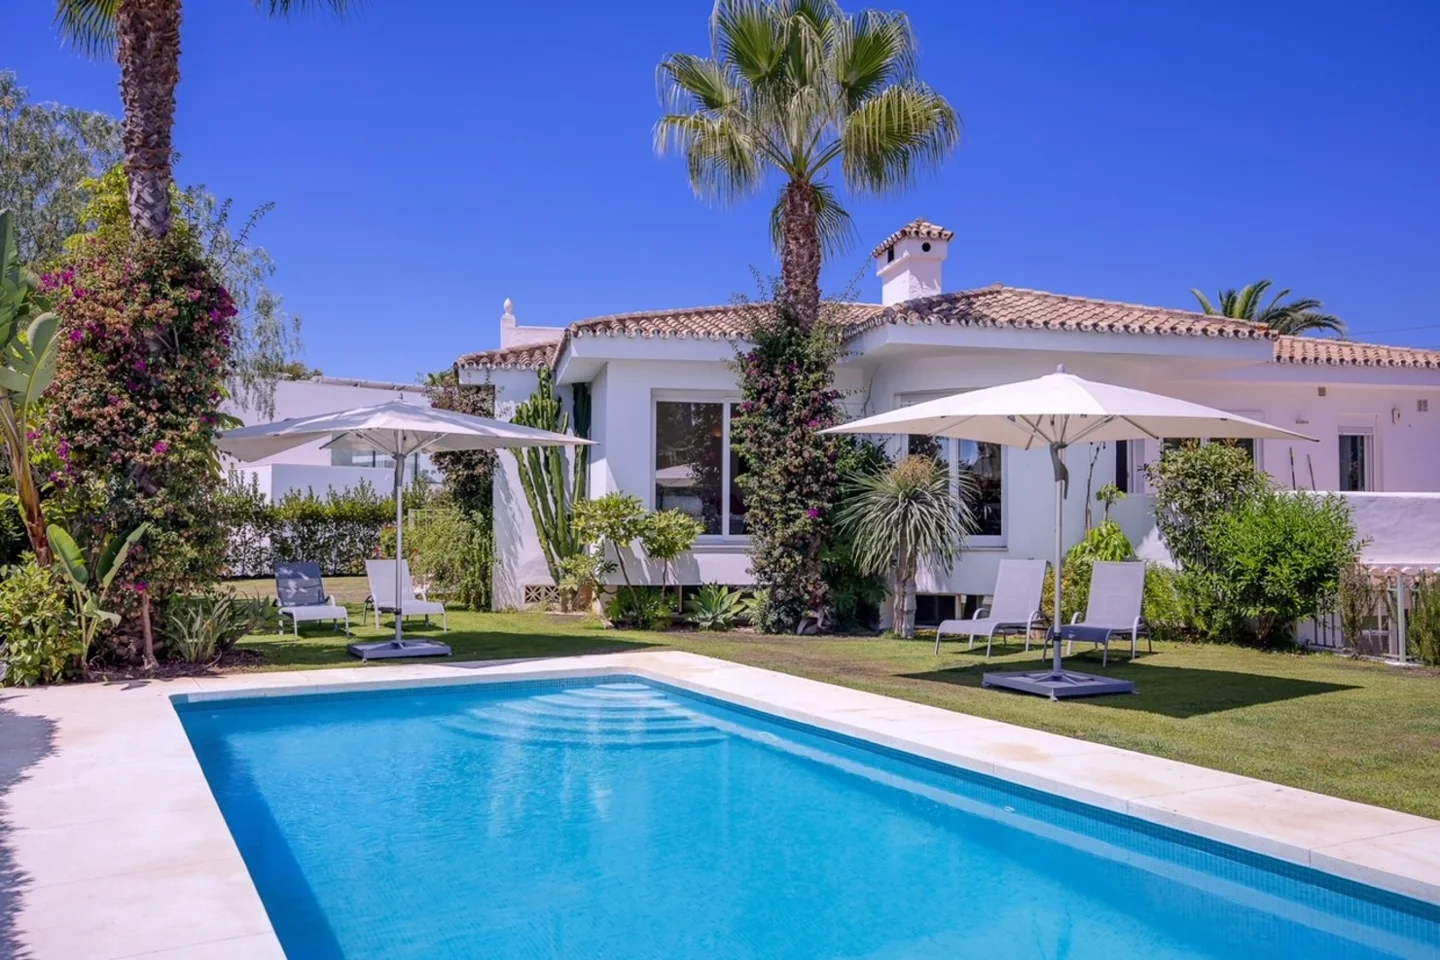 Magnificent villa for long term rentals at 400m from the beach in Marbesa.